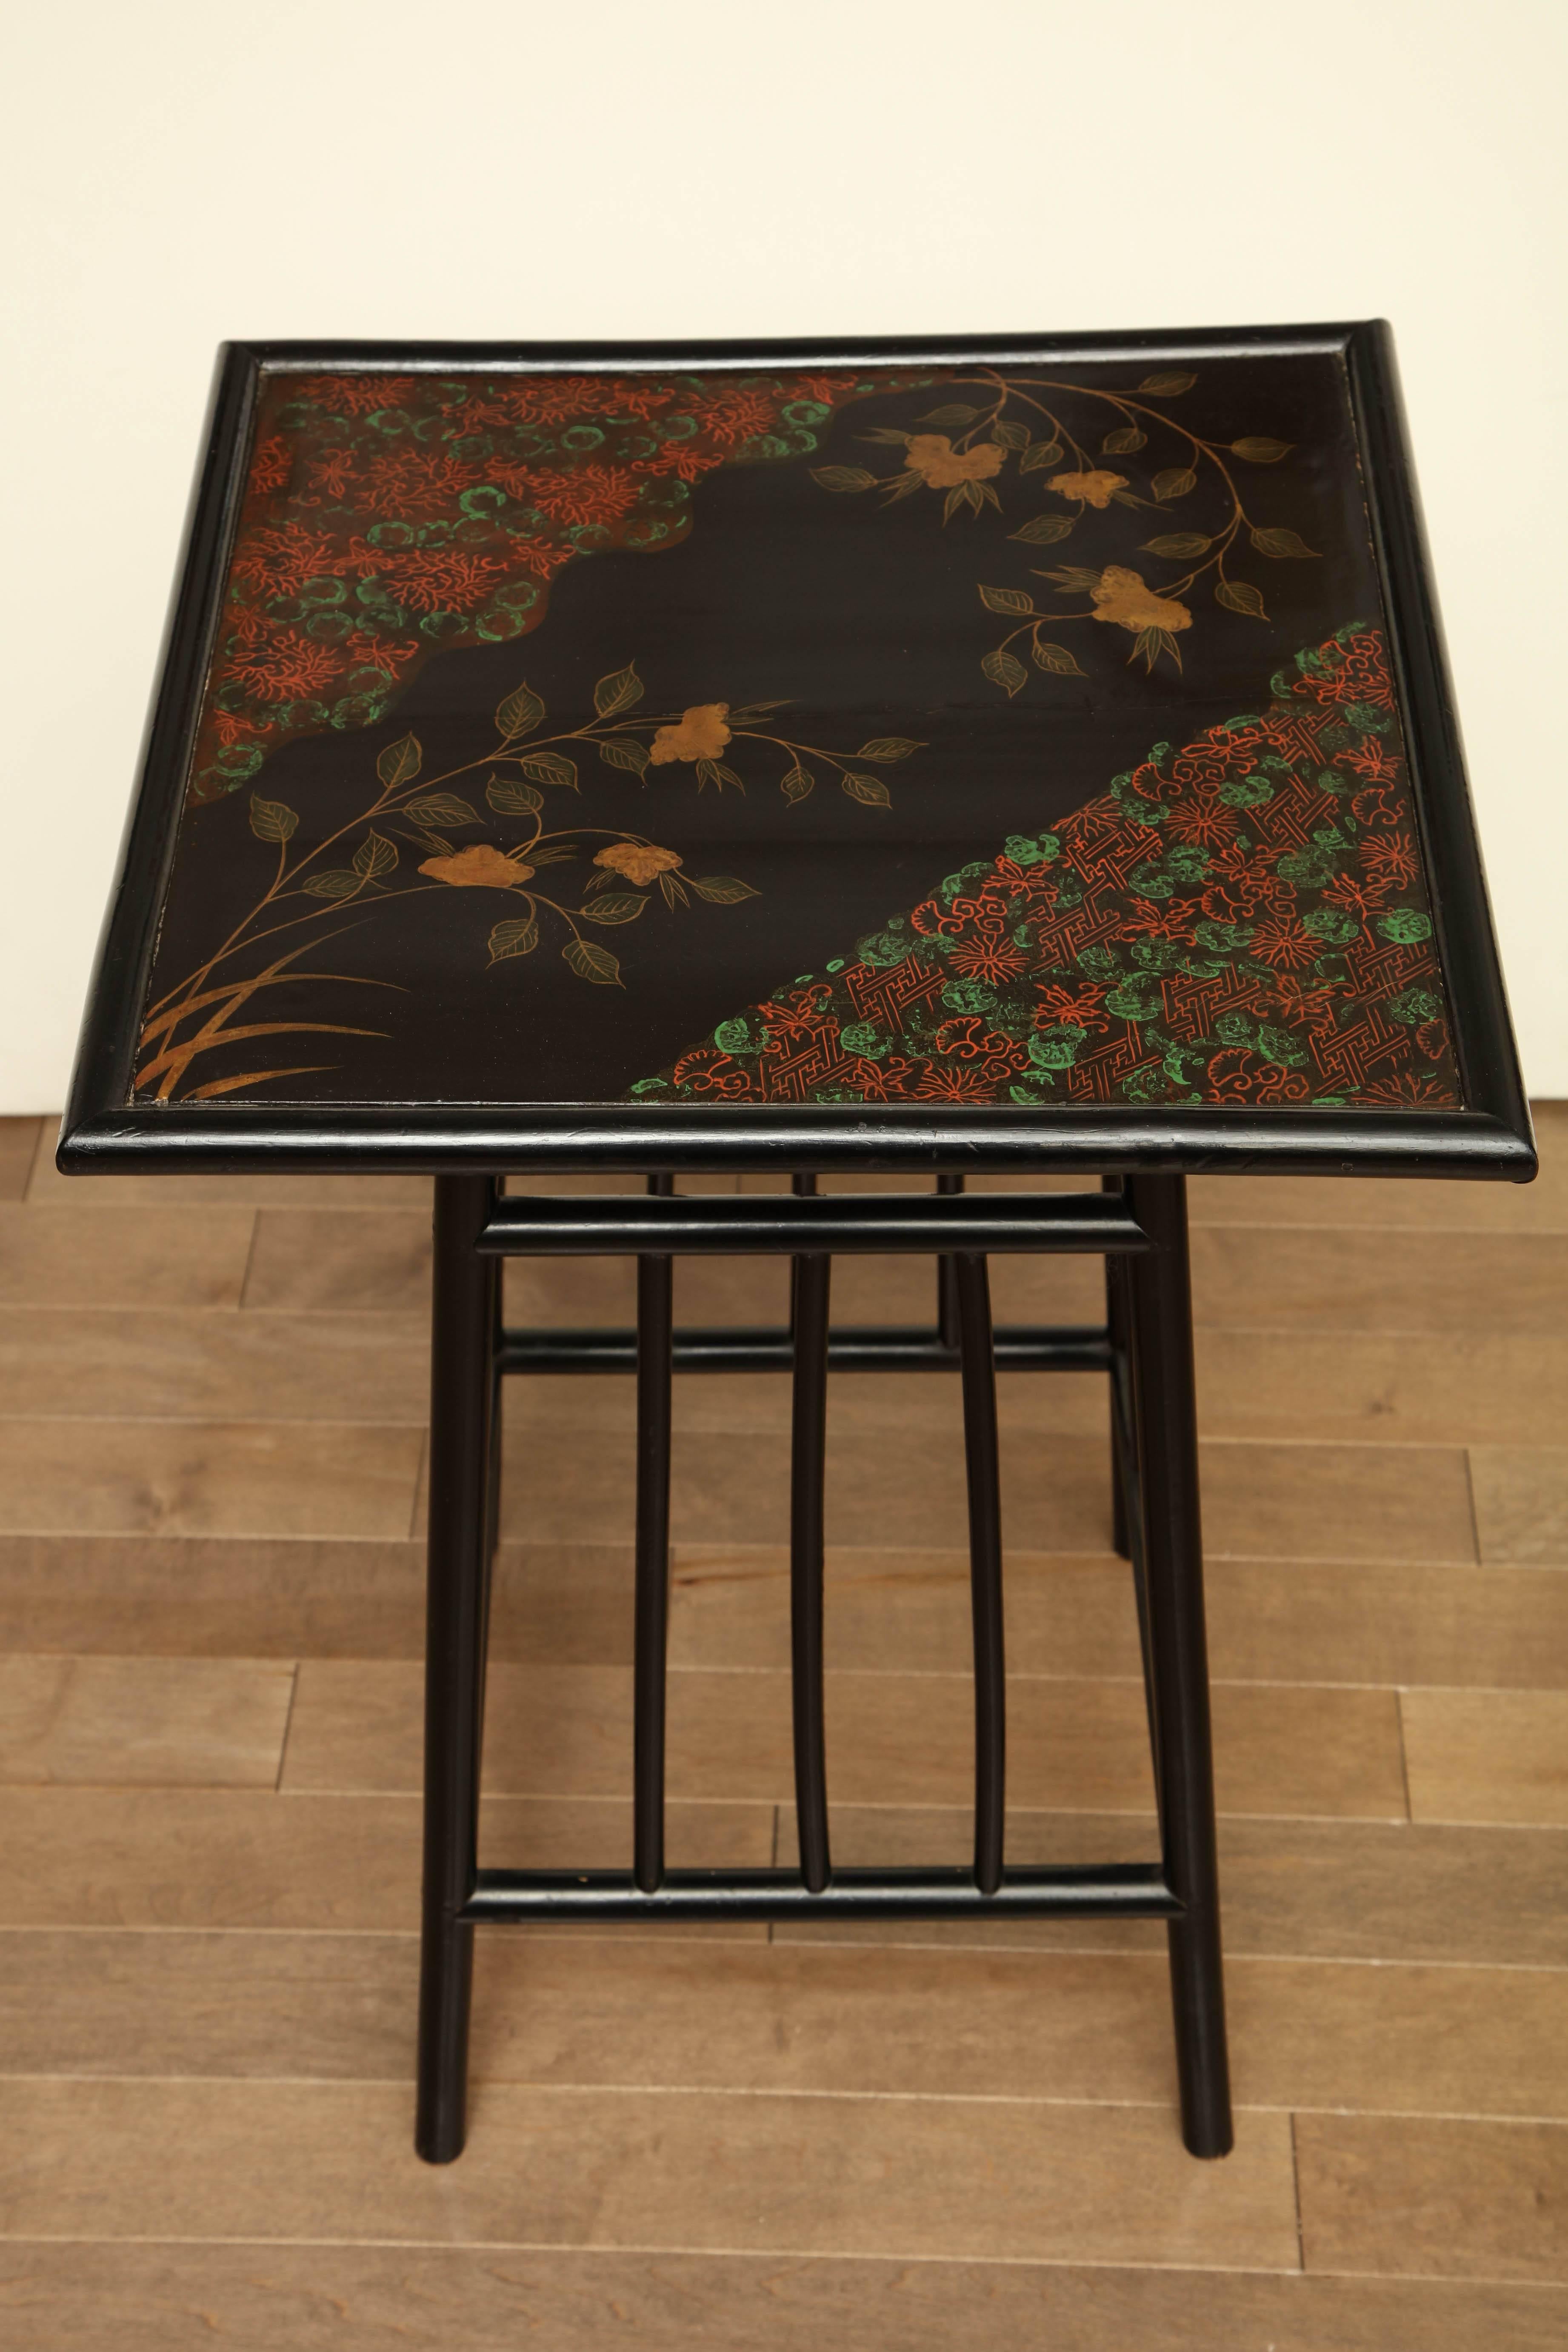 Aesthetic Movement Late 19th Century English, Lacquered and Decorated Table